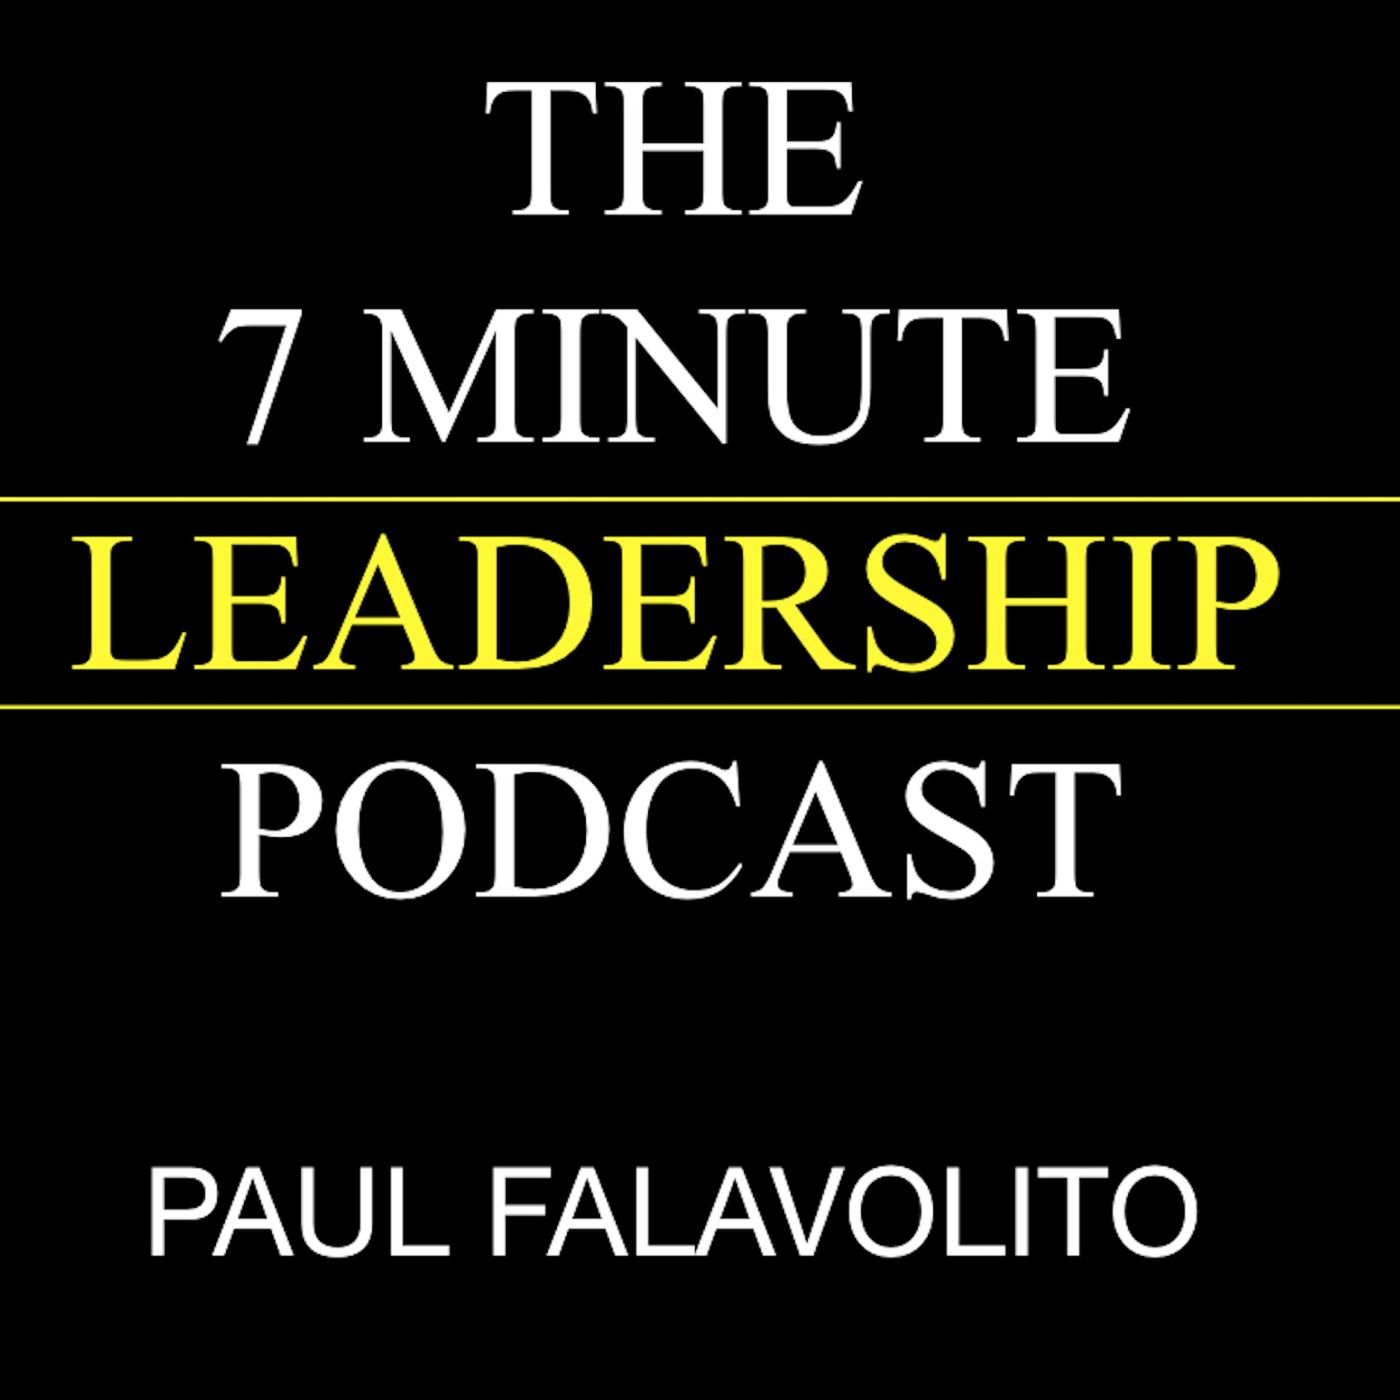 Episode 8 - In leadership, you must be your own momentum.